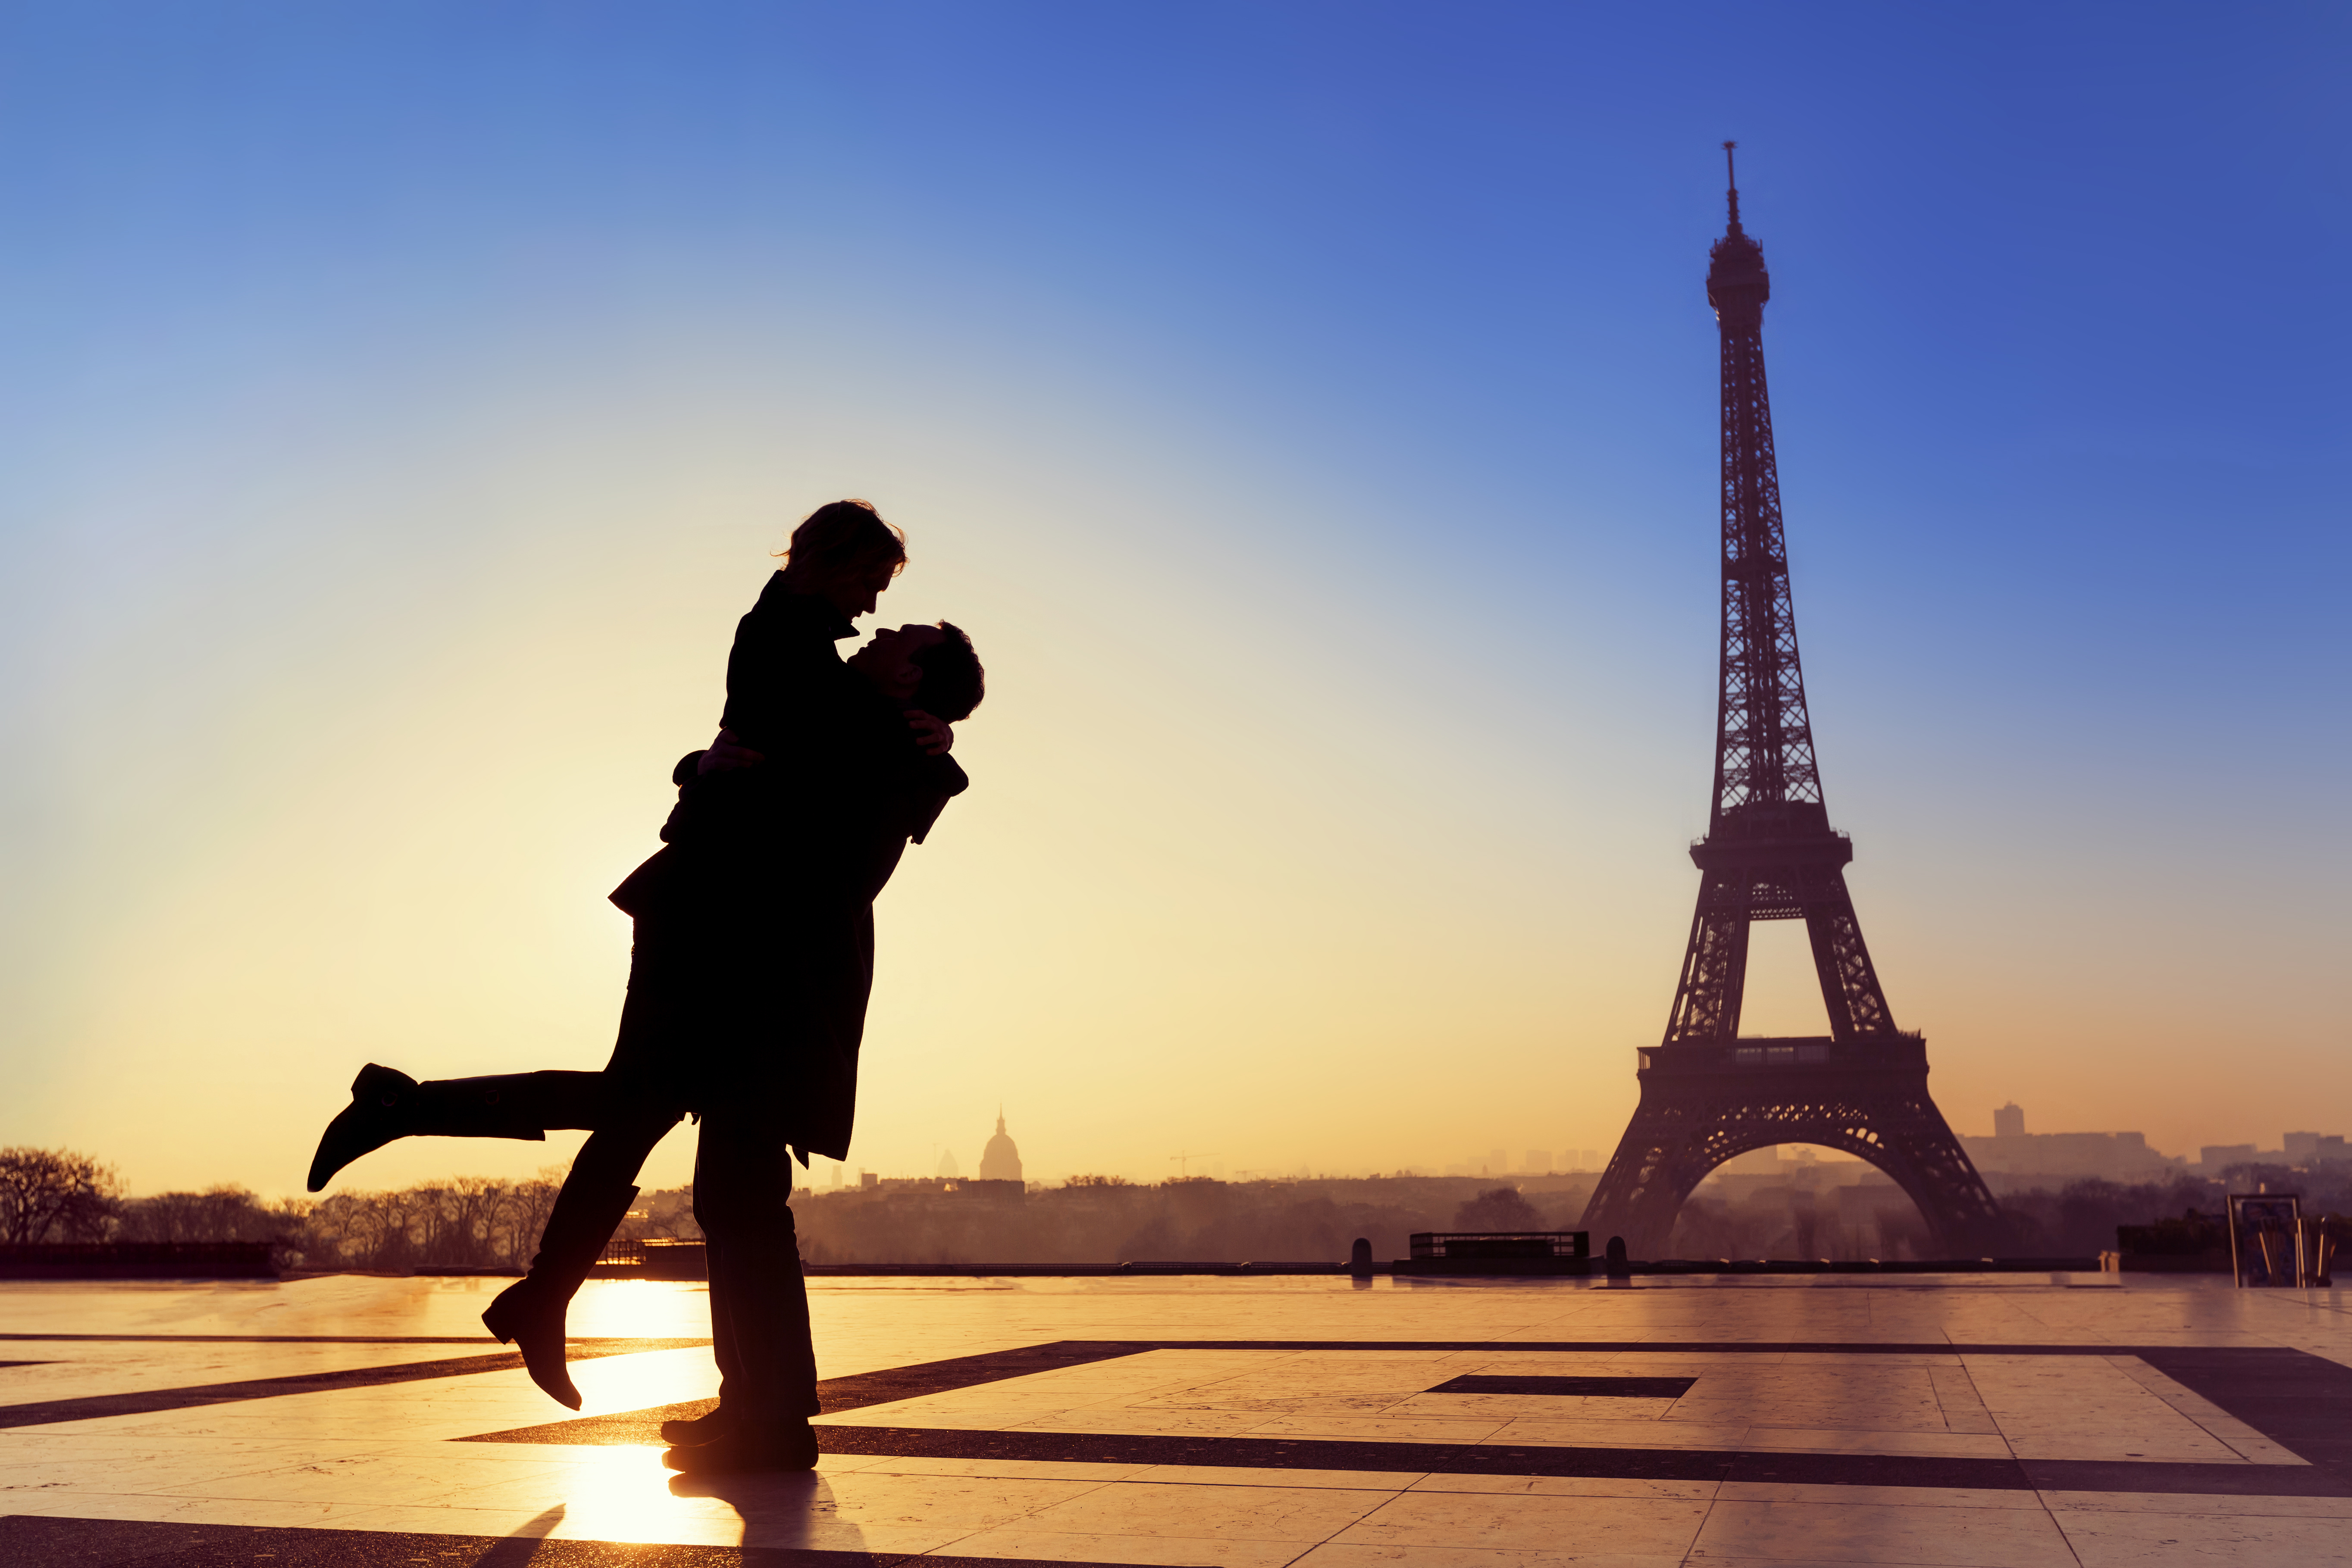 A silhouette photo of a couple in Paris | Source: Shutterstock